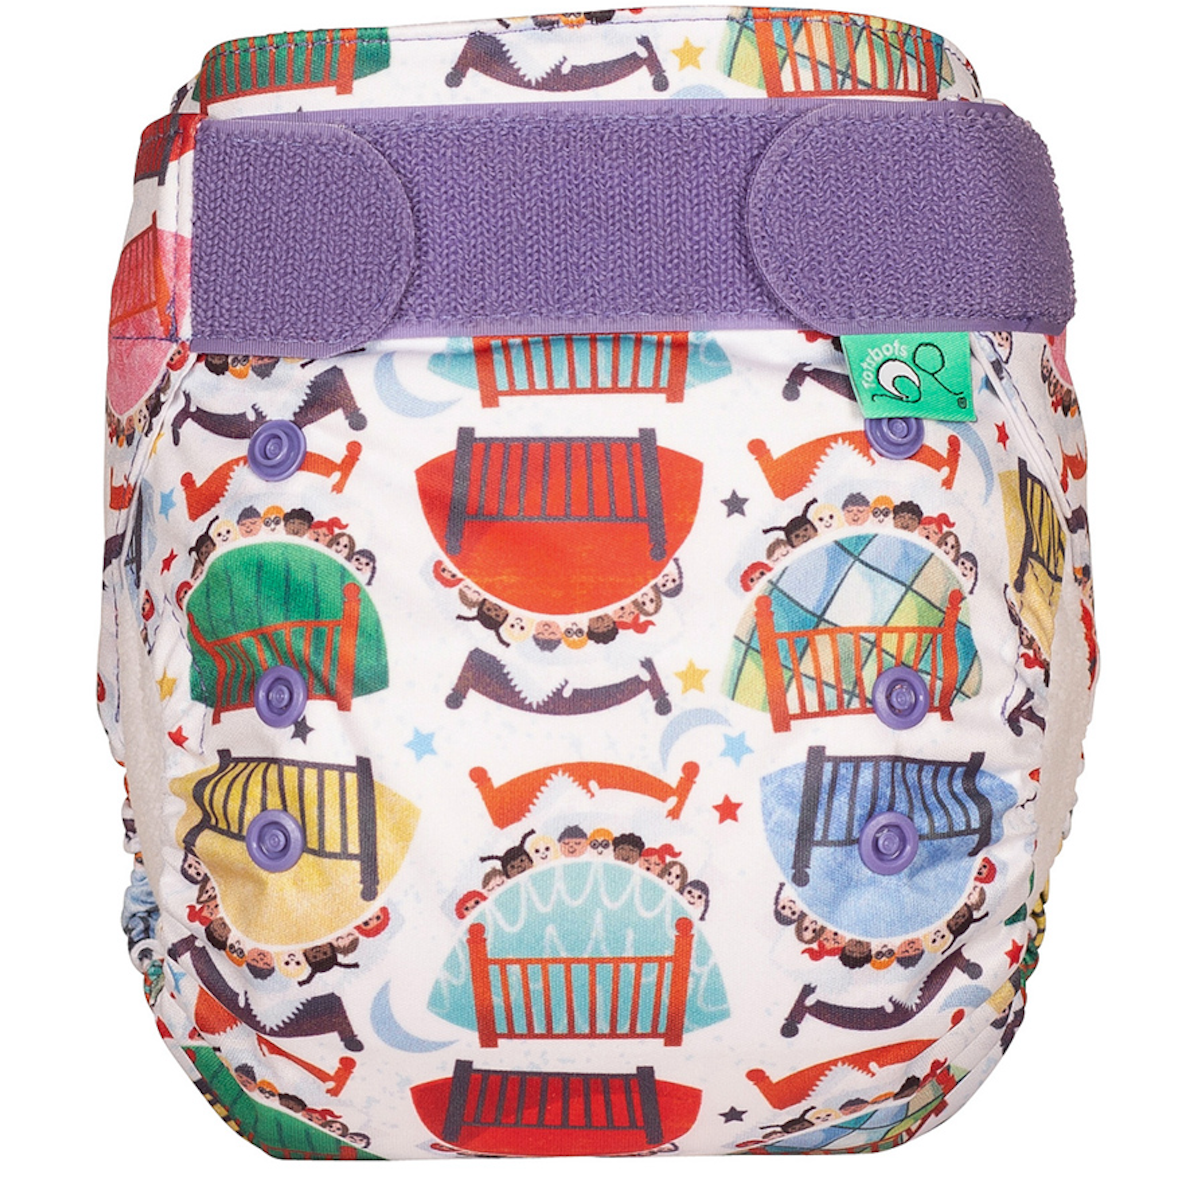 Tots Bots| Nappy EasyFit Star All-in-one | Earthlets.com |  | reusable nappies